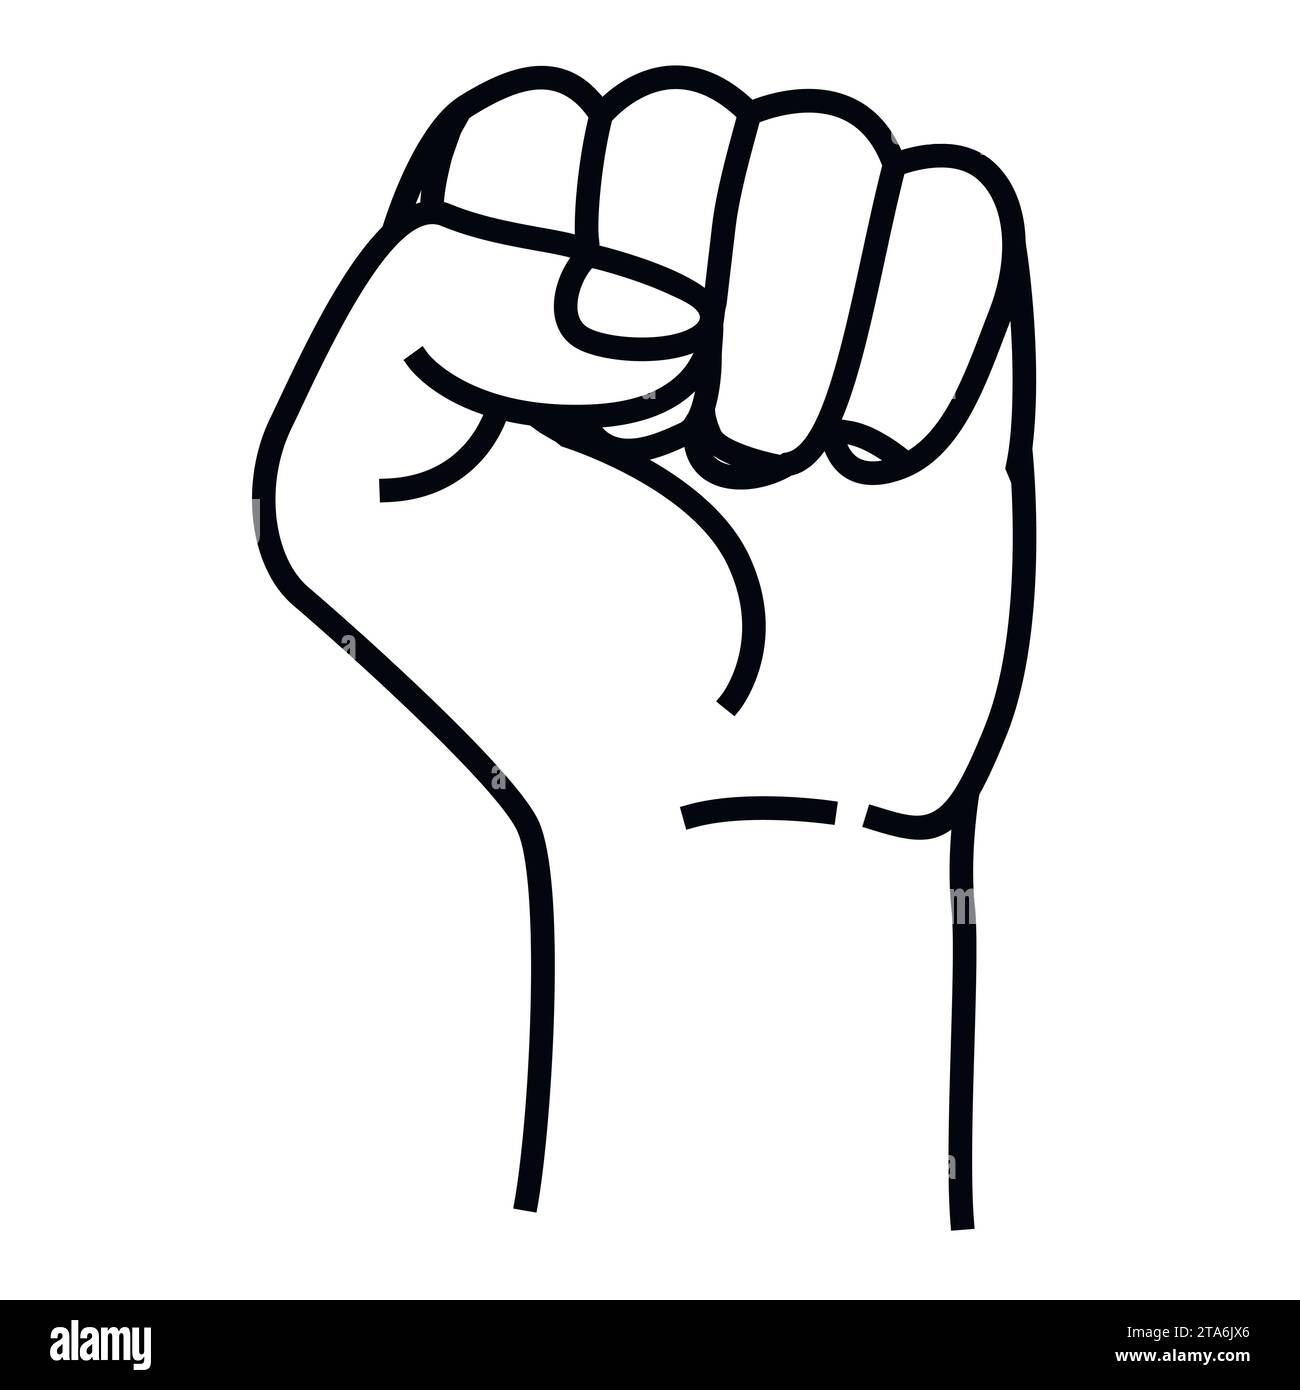 Raised fist hand gesture icon in line style isolated on white background. Vector illustration Stock Vector